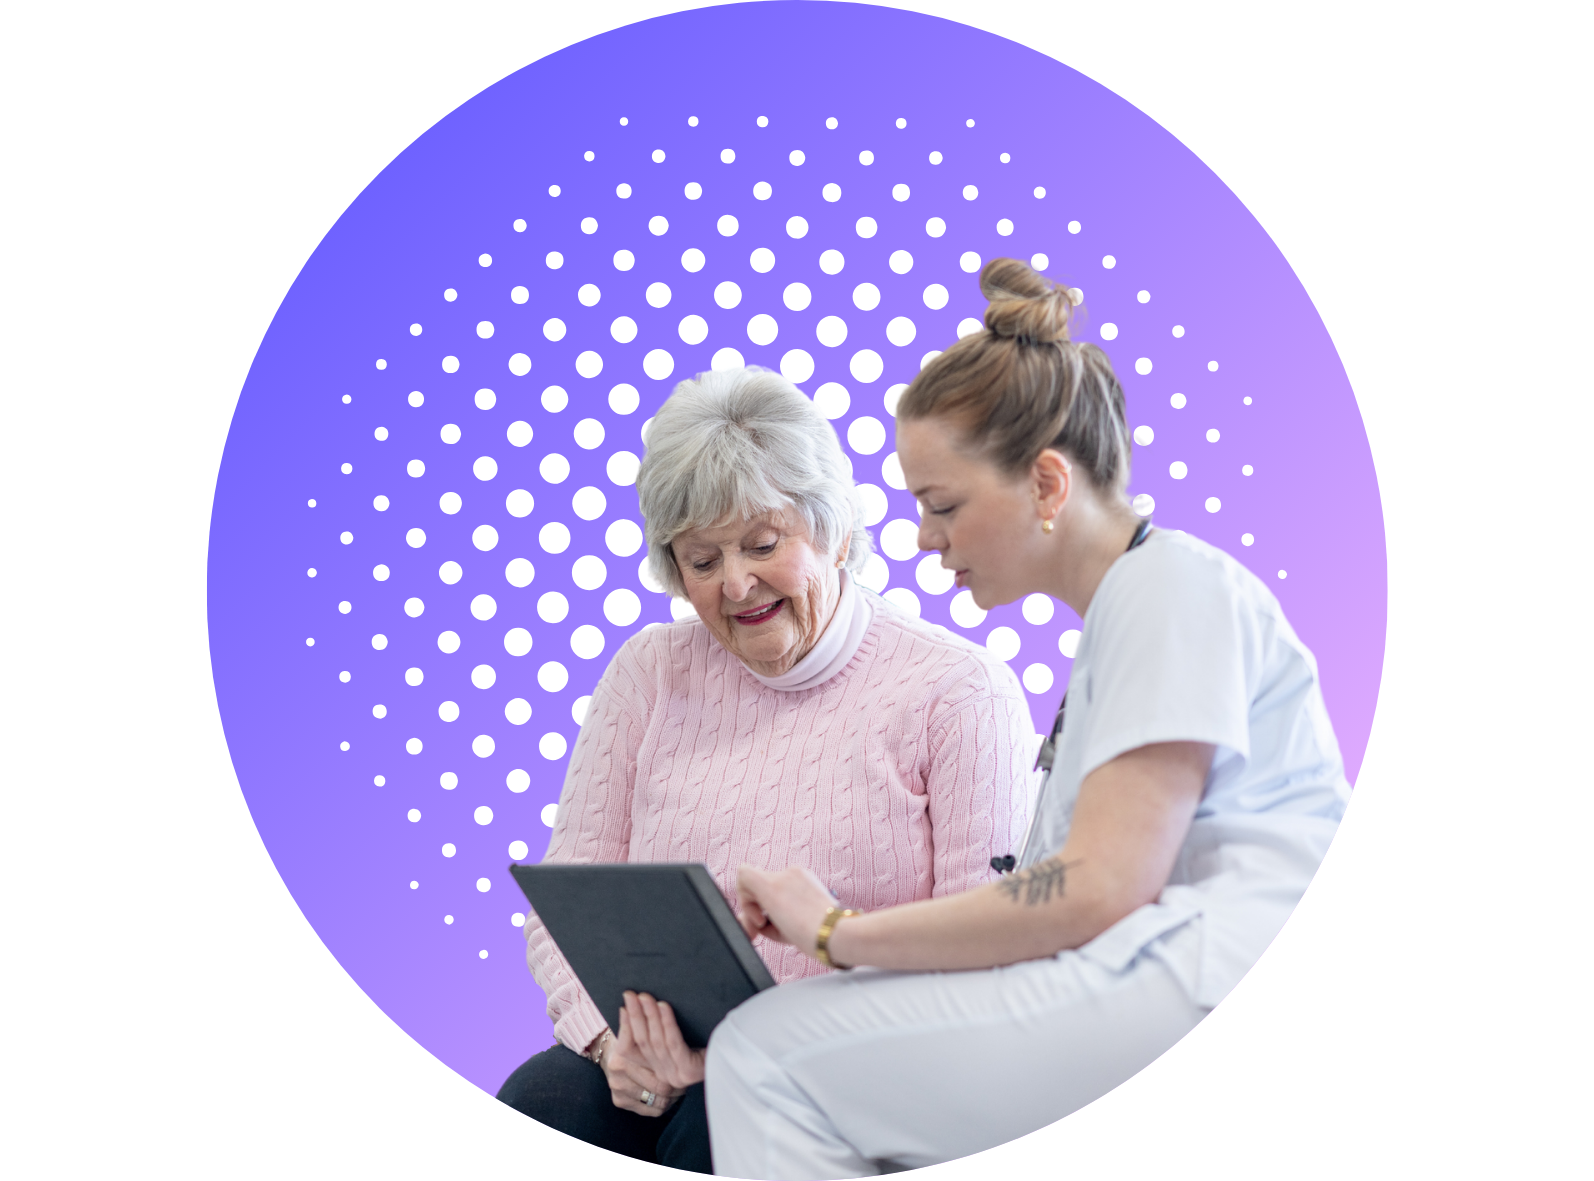 Care Worker with Patient and IPad image